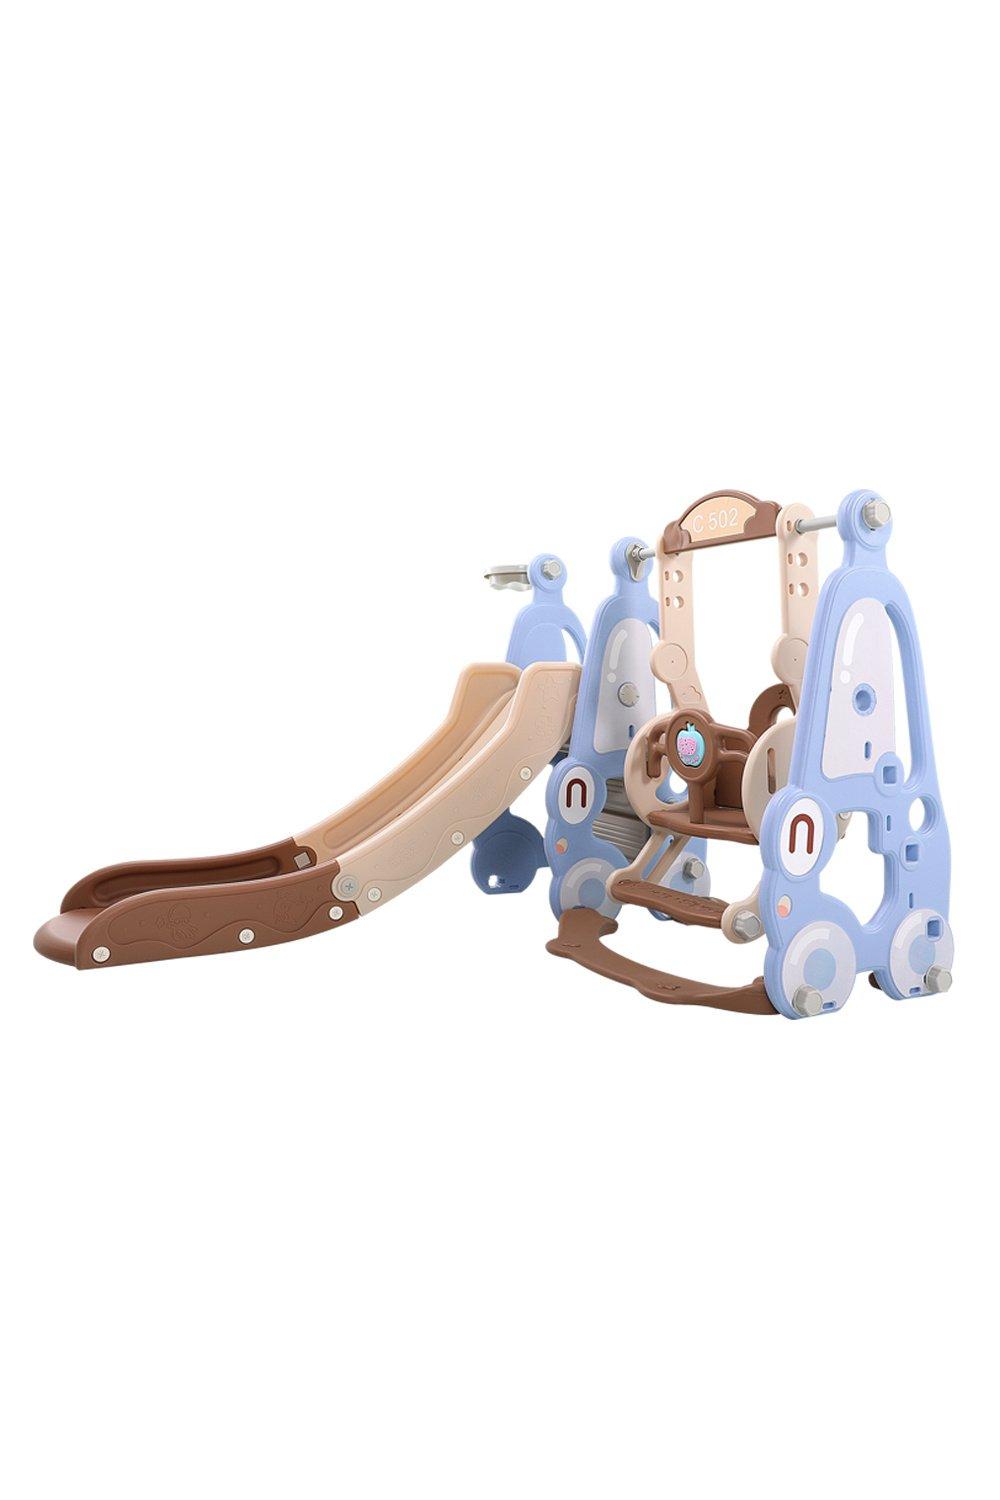 Swing Slide Set with Adjustable Height for Music Playback